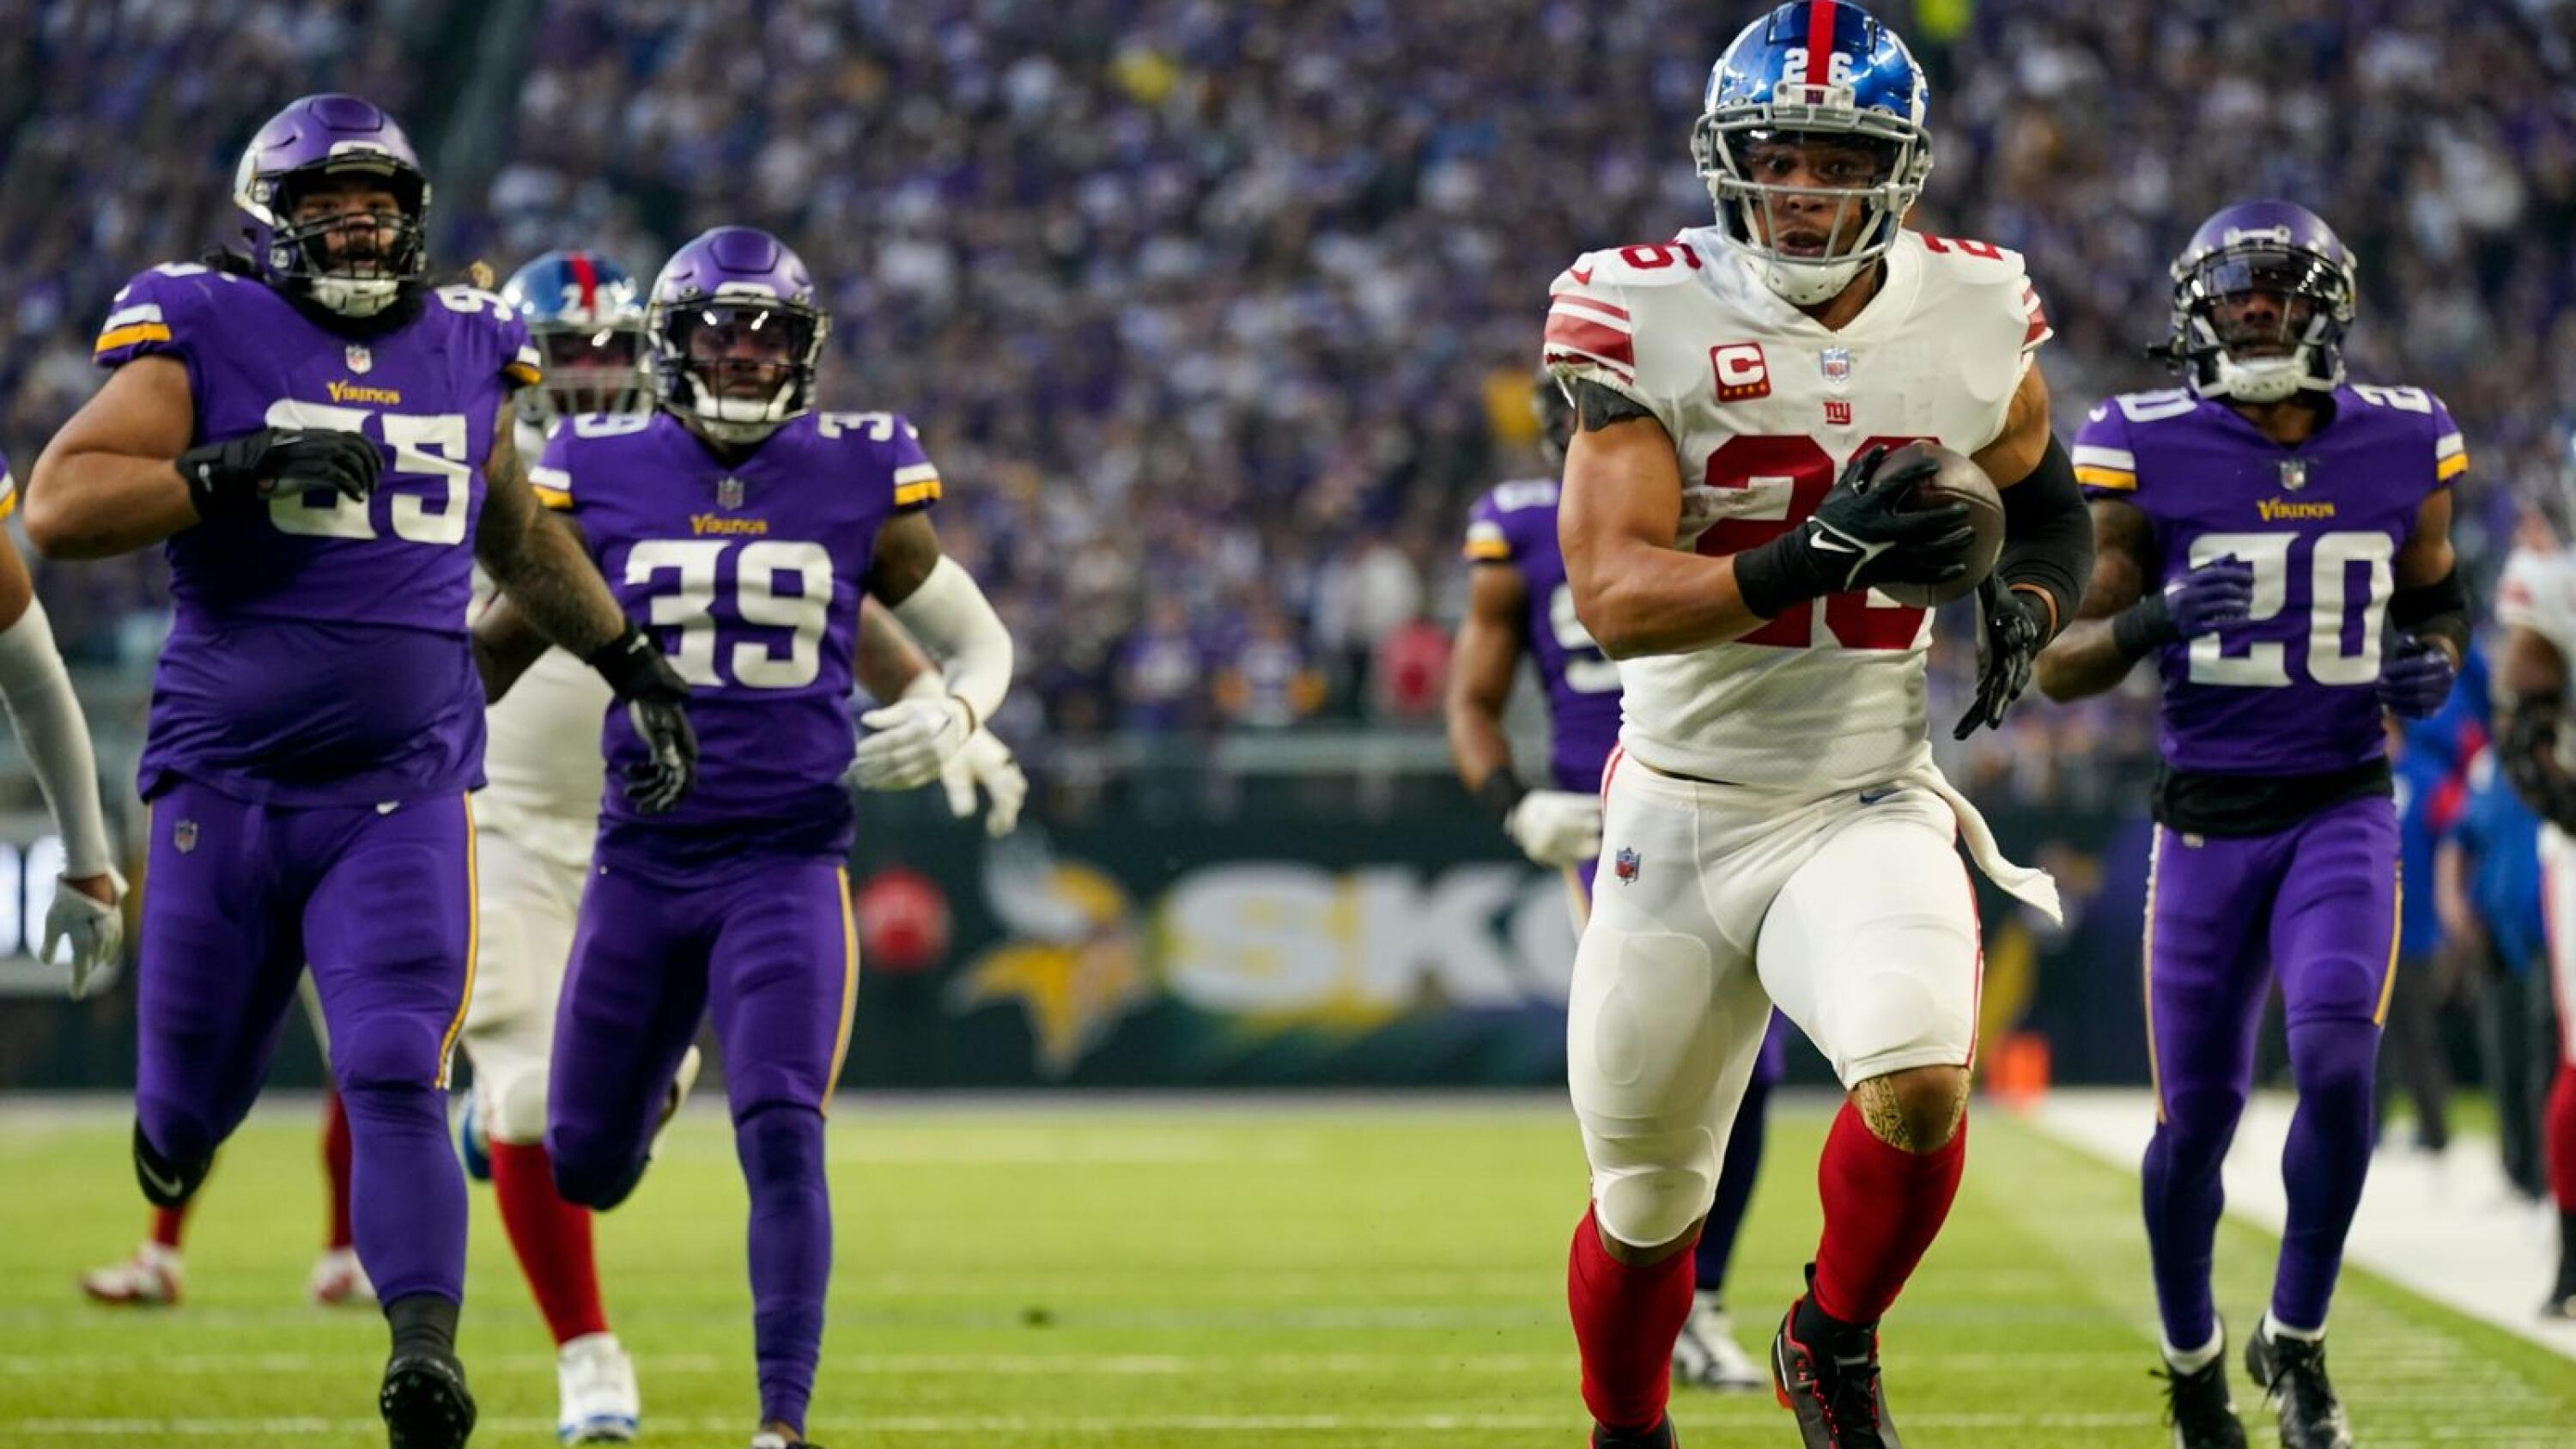 Giants outlast Vikings 31-24 for first playoff win in 11 years